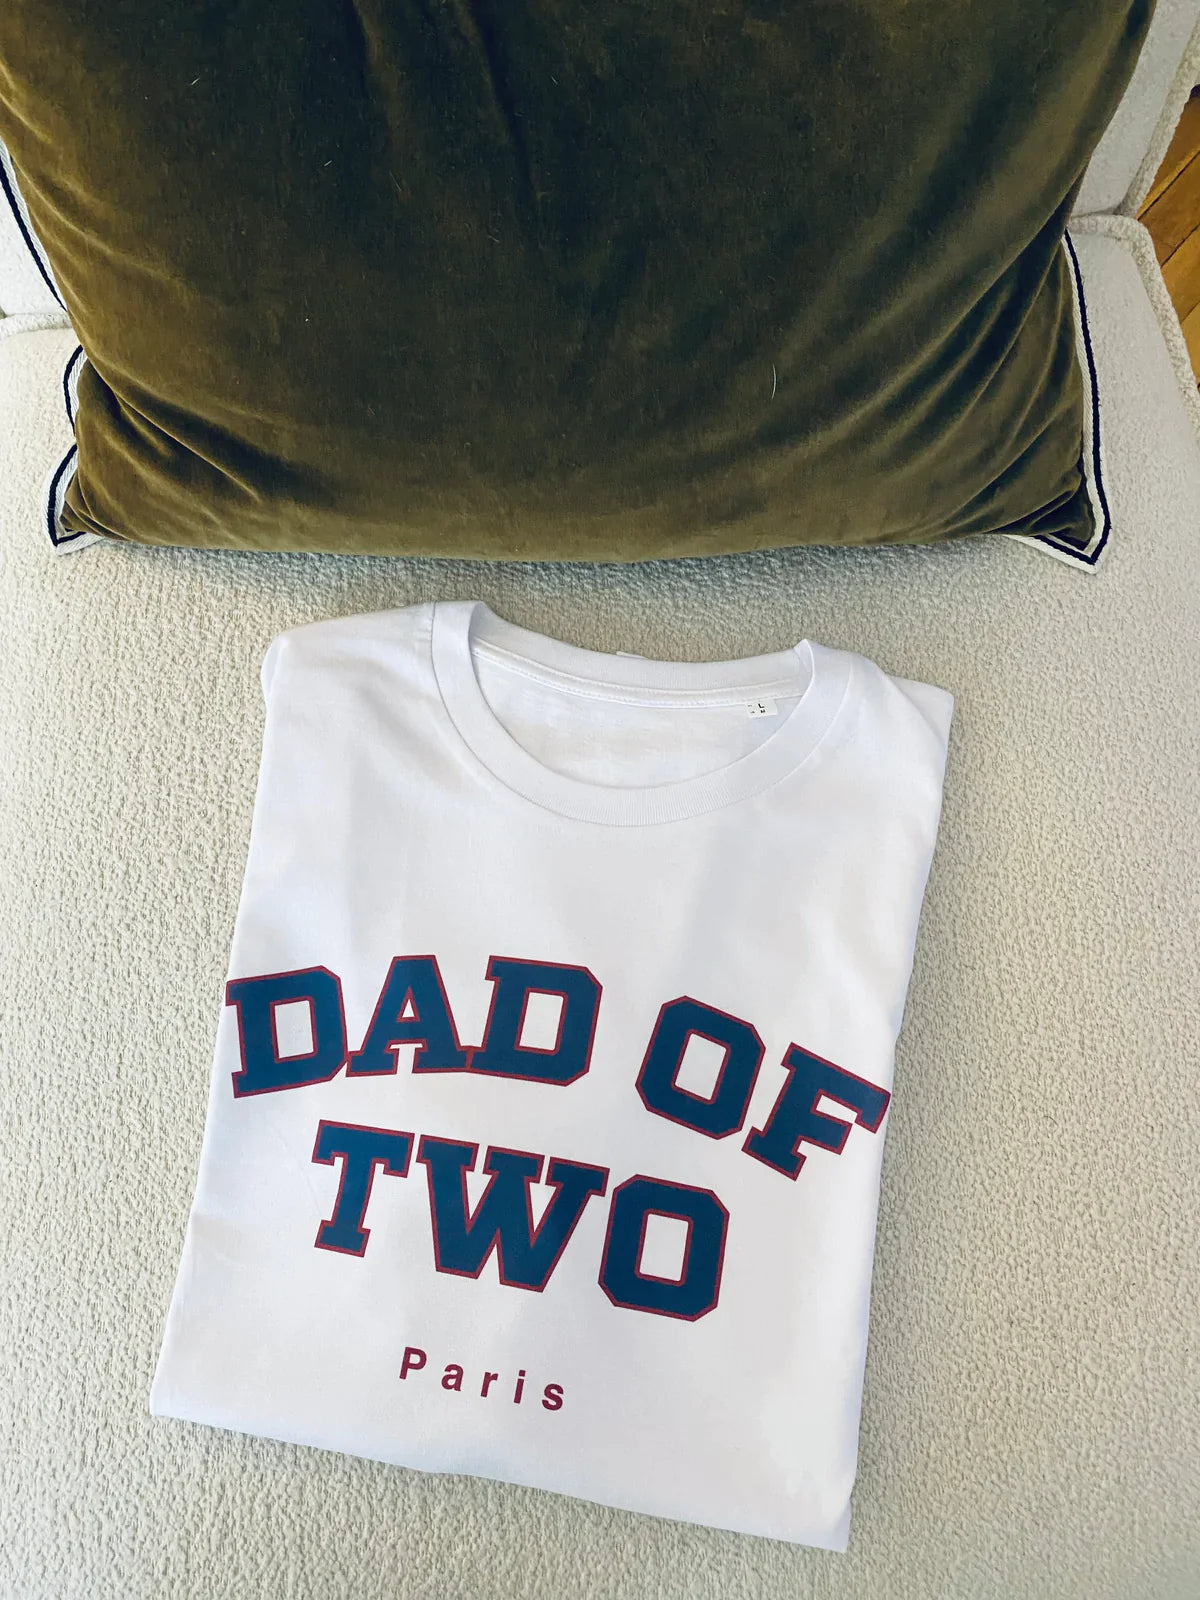 A T Shirt UNIVERSITY DAD OF TWO